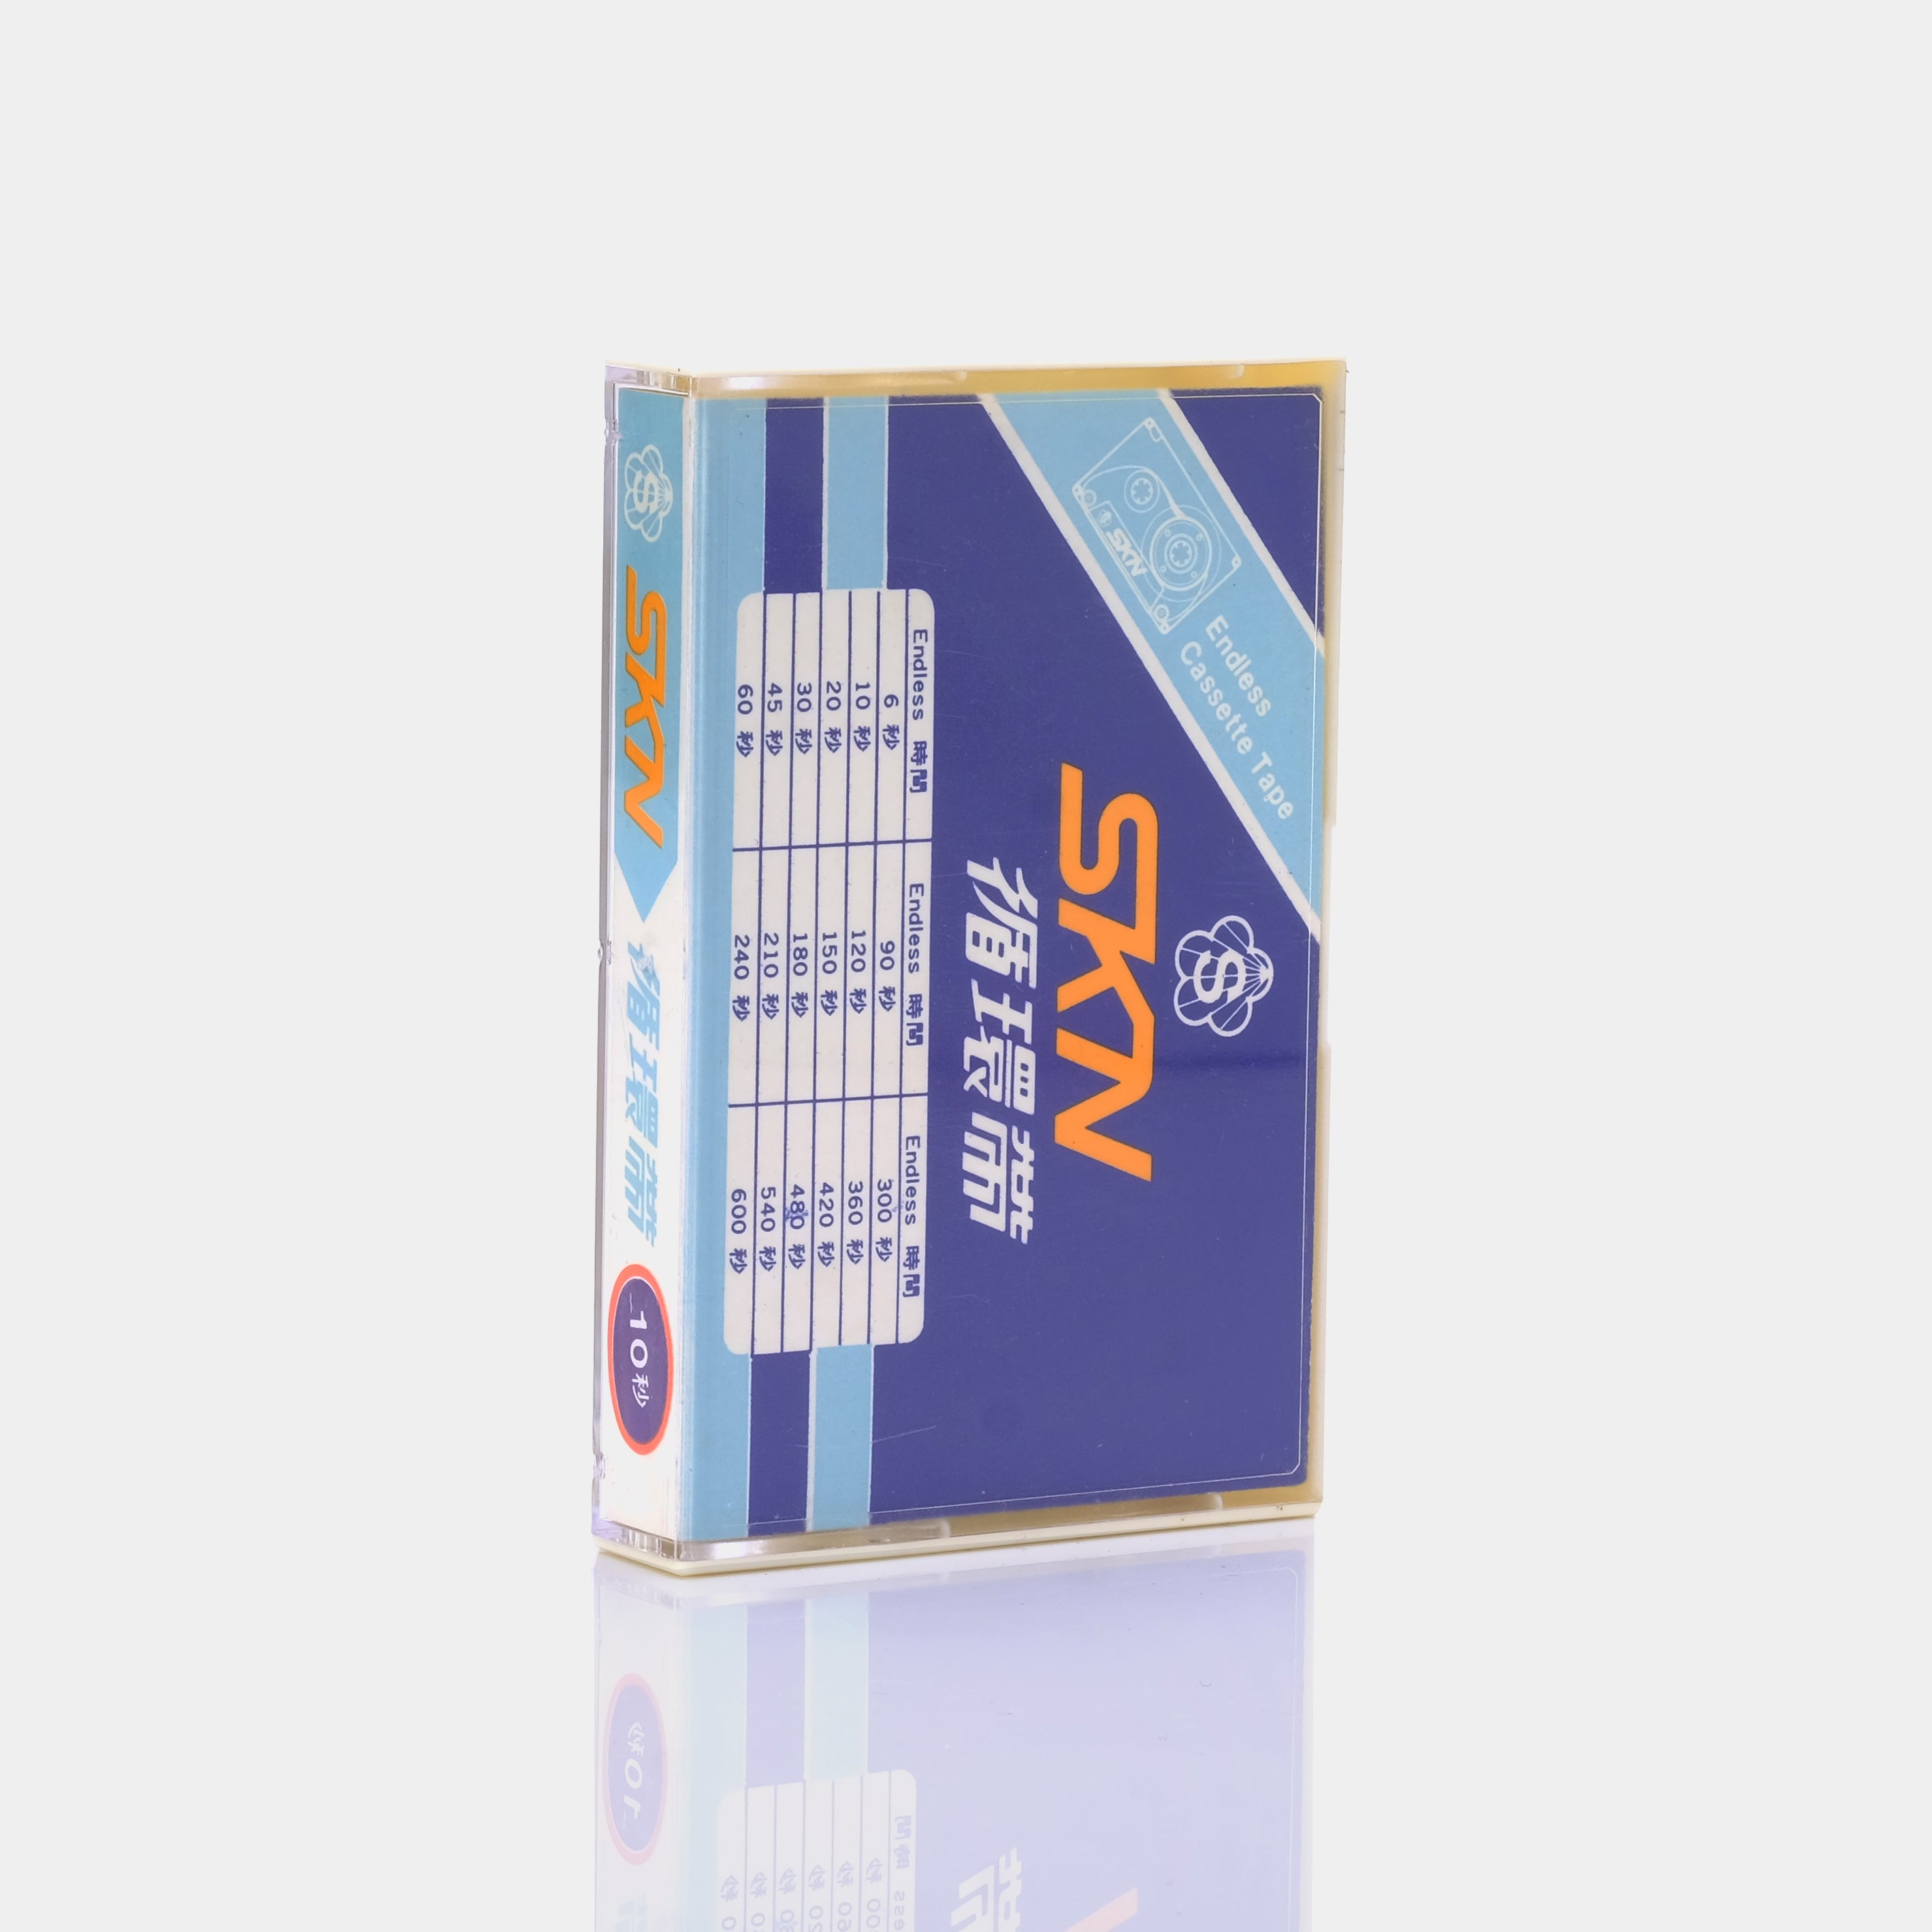 SKN Endless 10 Second Loop Blank Recordable Cassette Tape